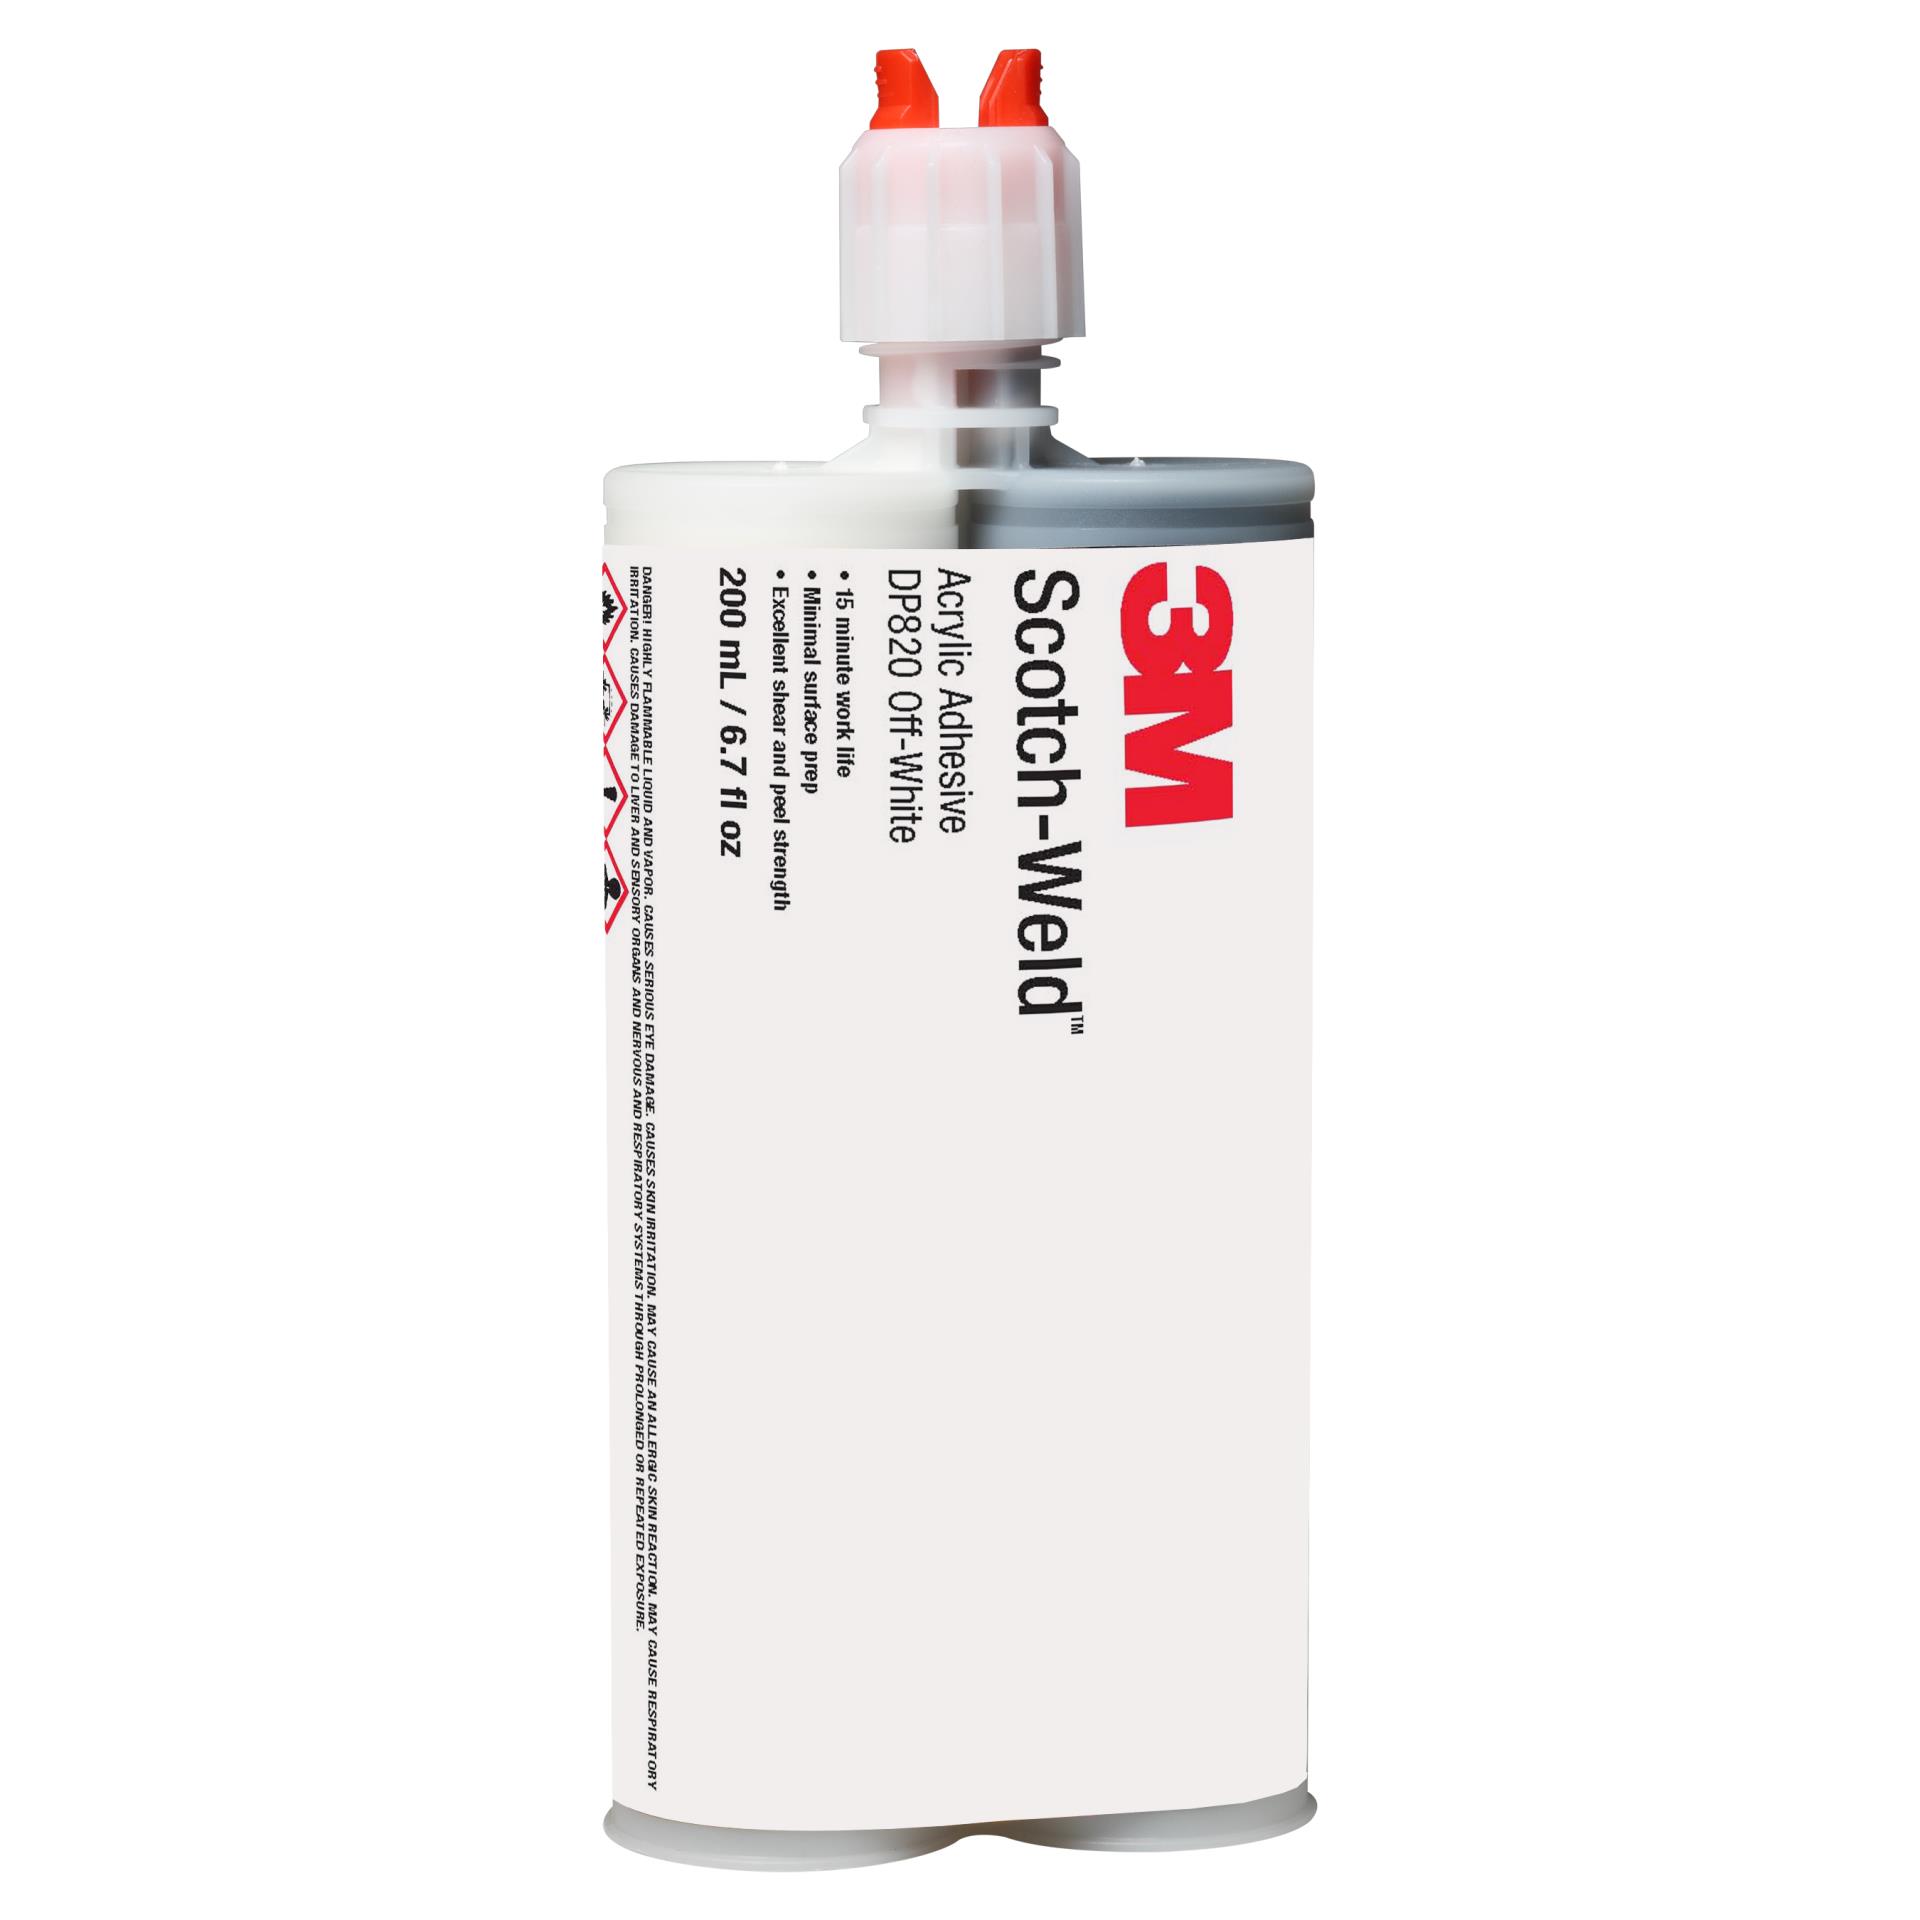 00021200893483 3M™ Scotch-Weld™ Acrylic Adhesive DP820, Off-White, 200 mL  Duo-Pak, 12/case Aircraft products 3M 9361483